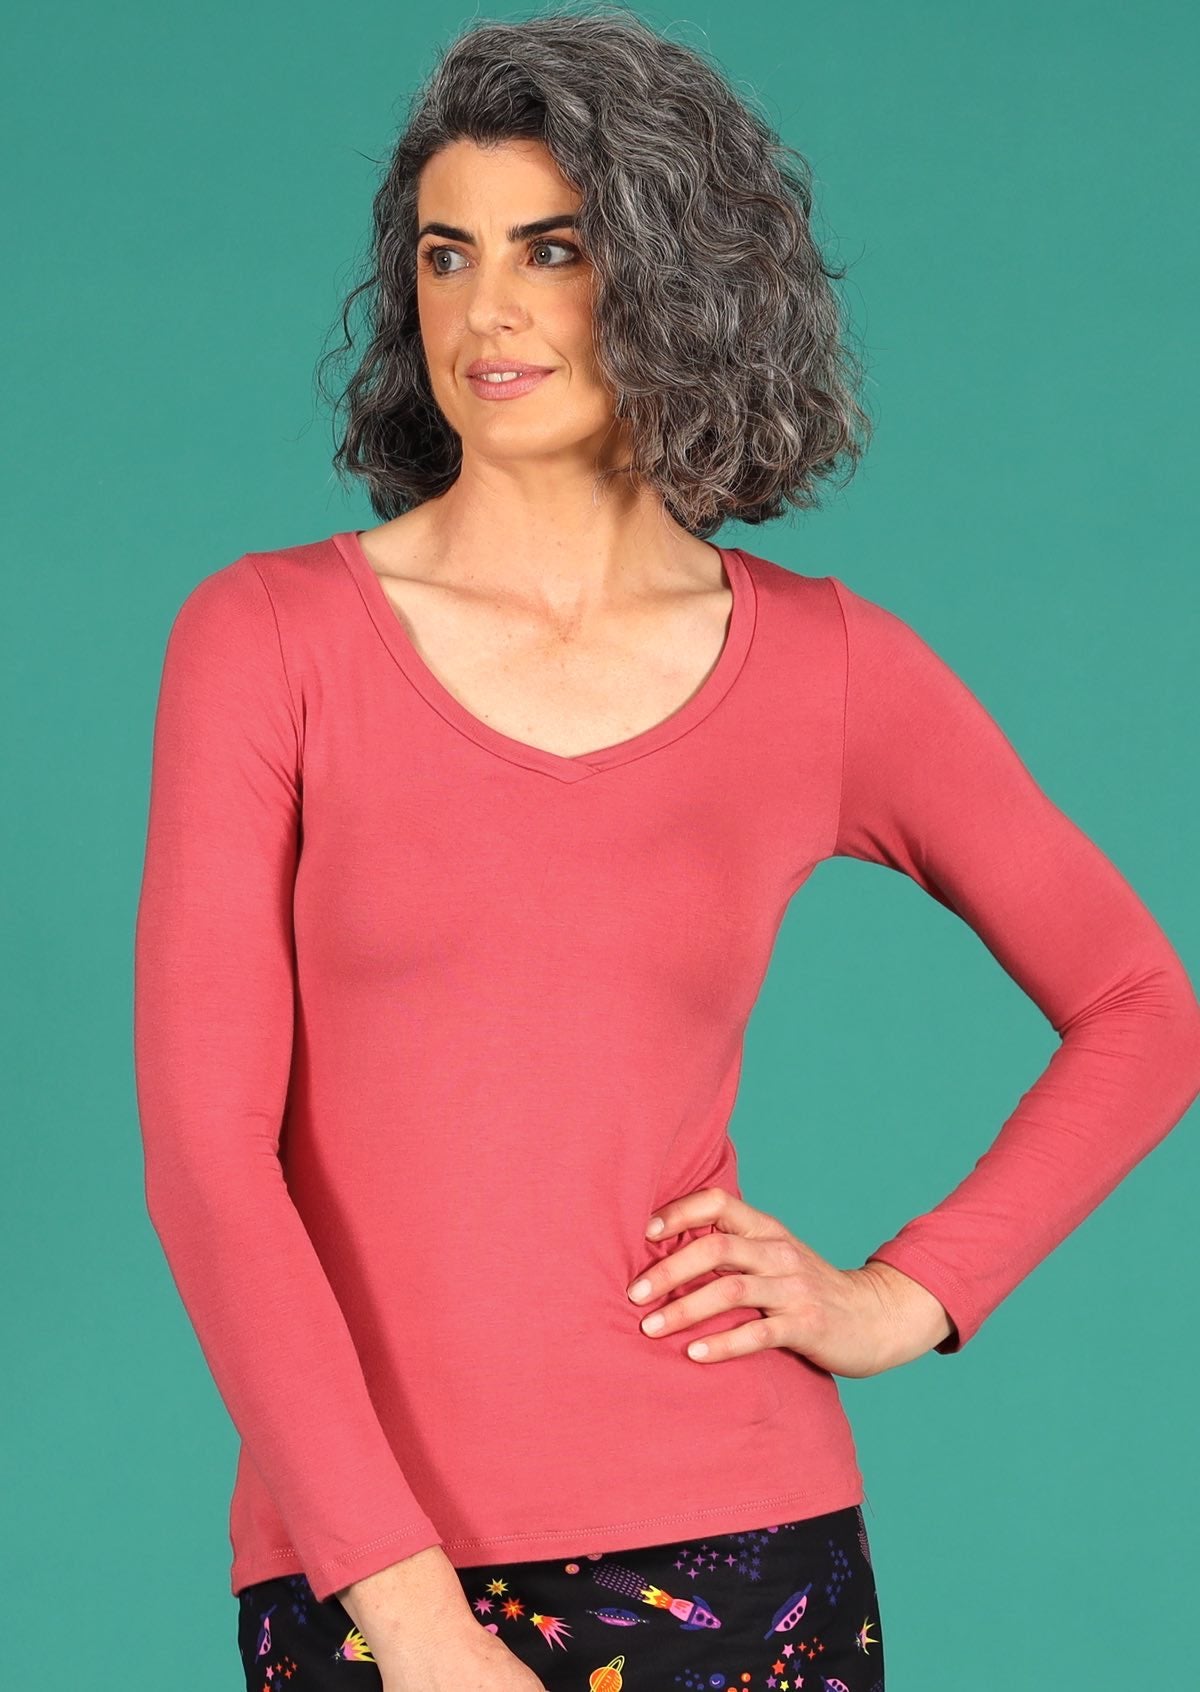 Woman with grey wavy hair wearing a rose pink long sleeve stretch v-neck soft rayon top.